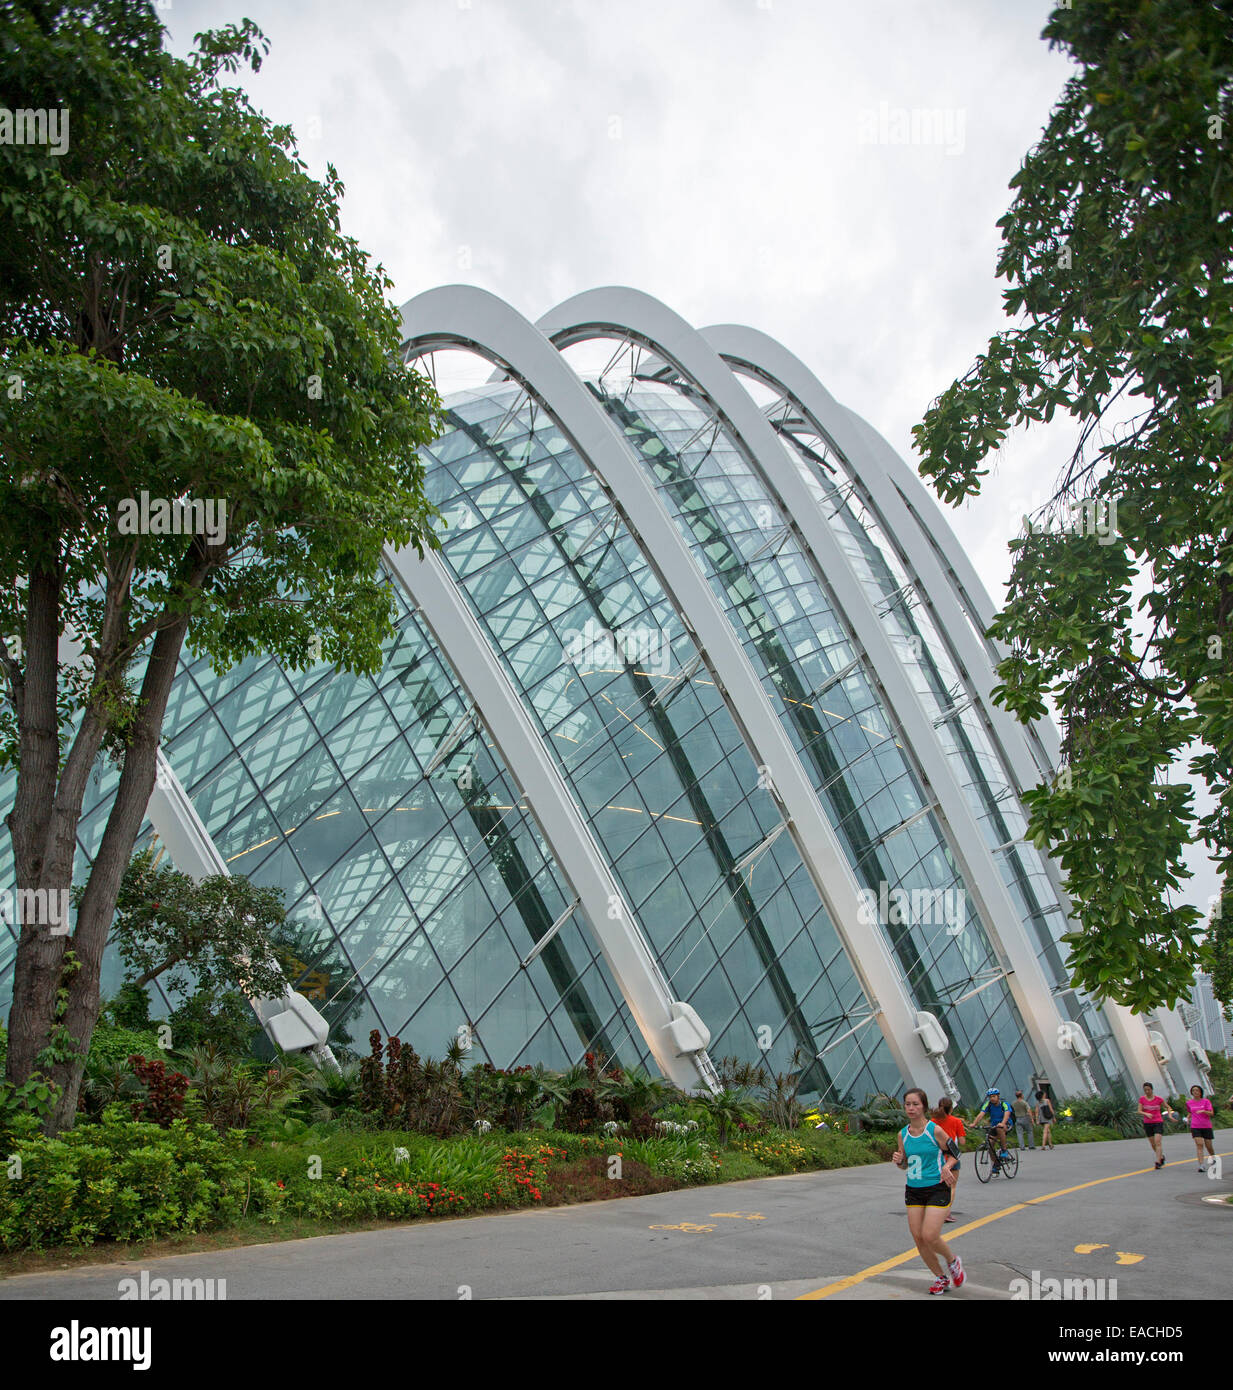 Gigantic dome / glass conservatory & trees at Gardens By The Bay in  Singapore with people jogging on adjacent pedestrian track Stock Photo -  Alamy